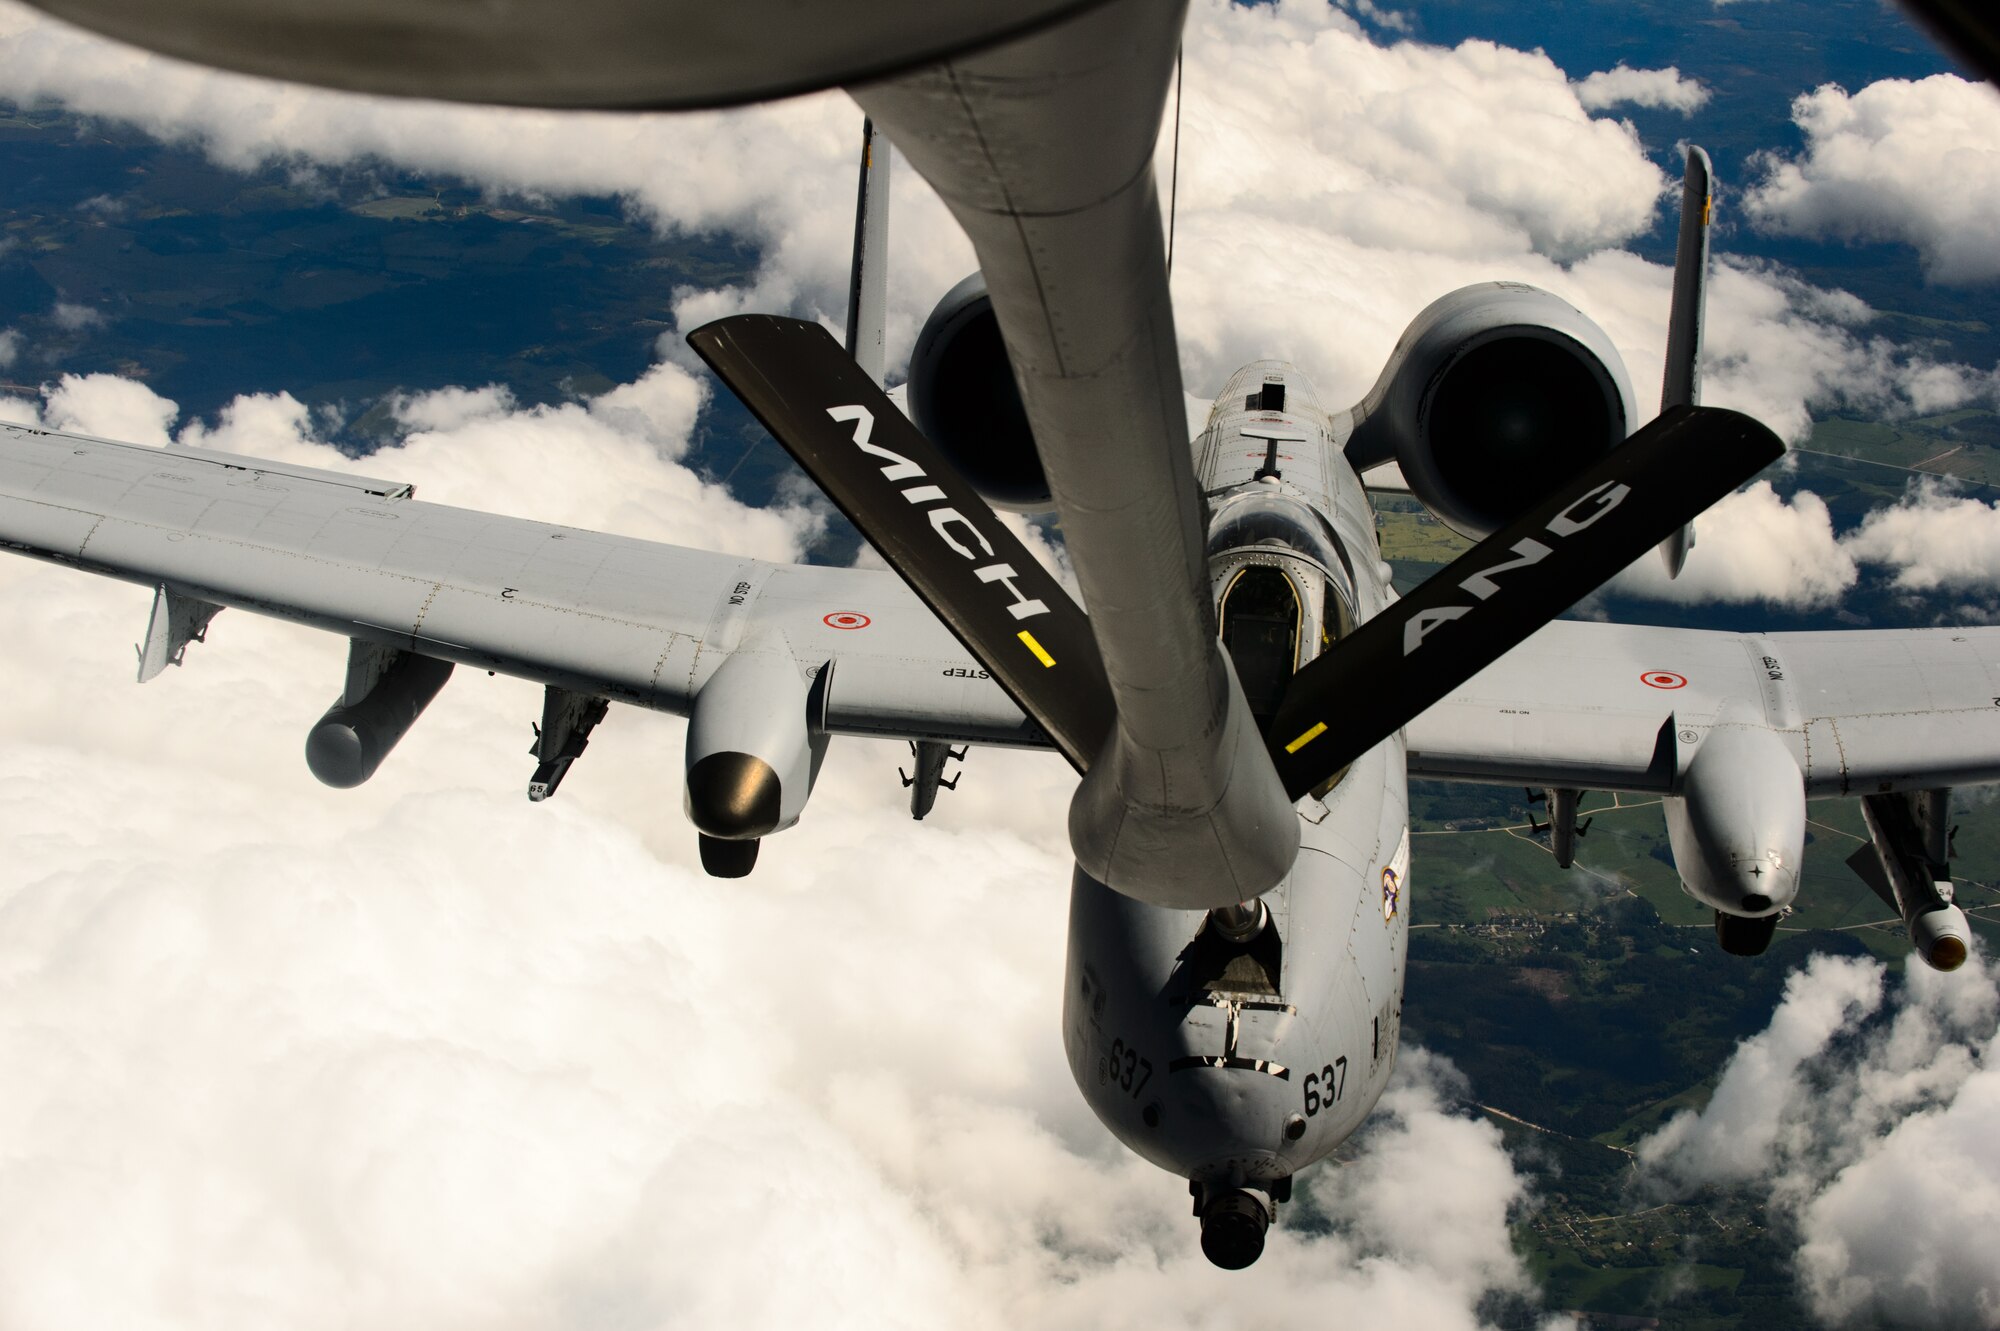 Air National Guardsmen conduct aerial-refueling in order to extend the close air support capabilities provided by the A-10 Thunderbolt II to participants of Saber Strike 15 June 9, 2015 in Latvian Air Space. Guardsmen from Maryland, Michigan and Pennsylvania came together to support Saber Strike 15 by providing aerial-refueling and close air support. Saber Strike 15 is a joint and multinational exercise designed to promote stability in the Baltic area and provide an opportunity for military members to sharpen their skills. (U.S. Air Force photo/ Staff Sgt. Armando A. Schwier-Morales)